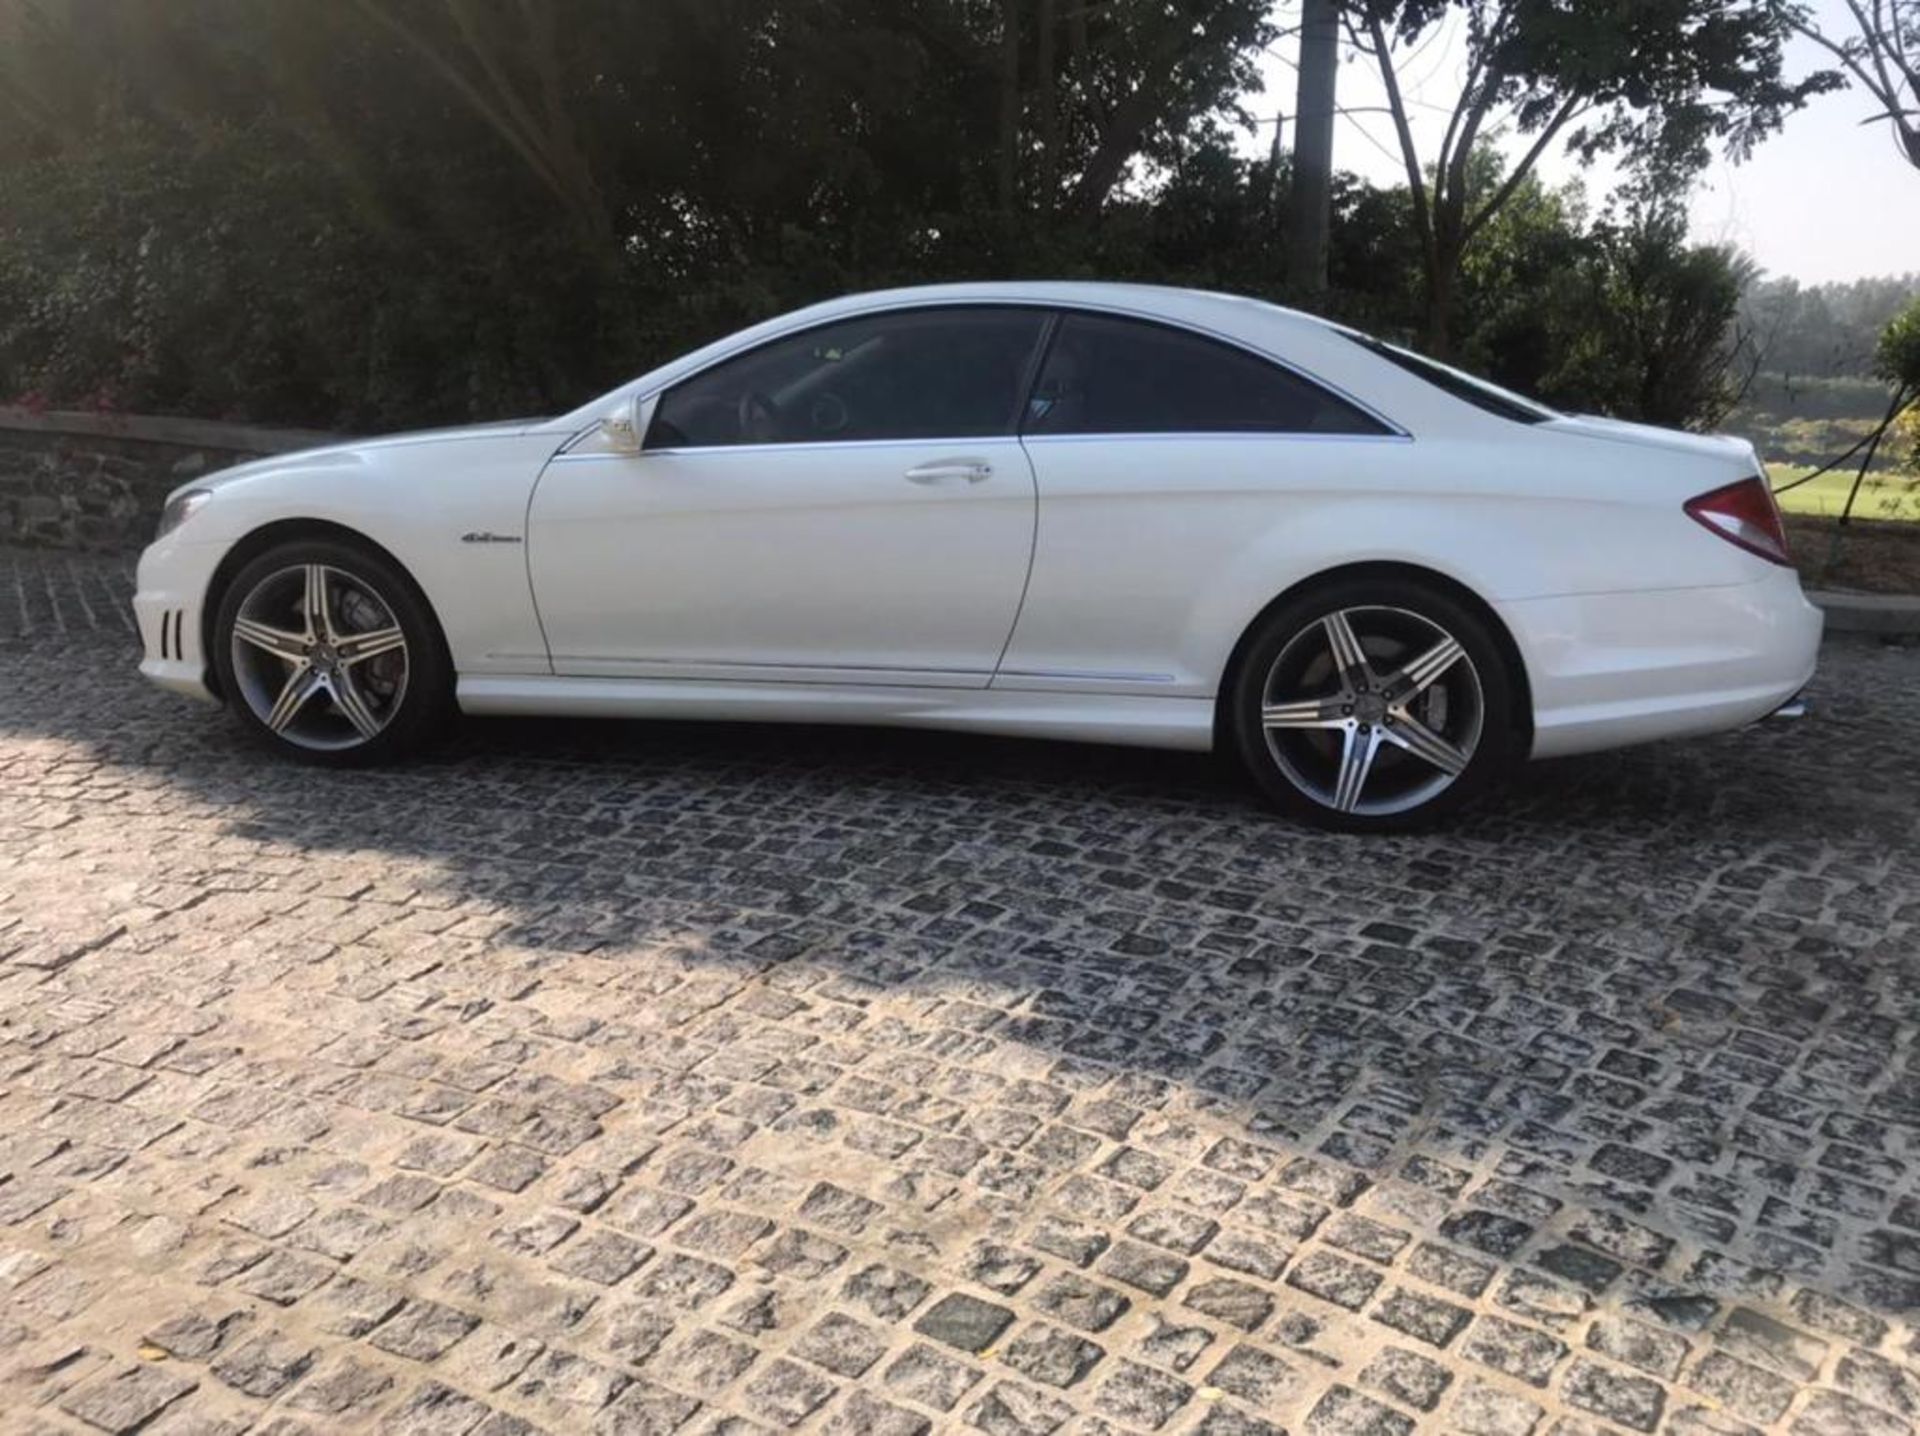 2008 Mercedes CL63 92,000km can export vat free available mid April - Image 3 of 12